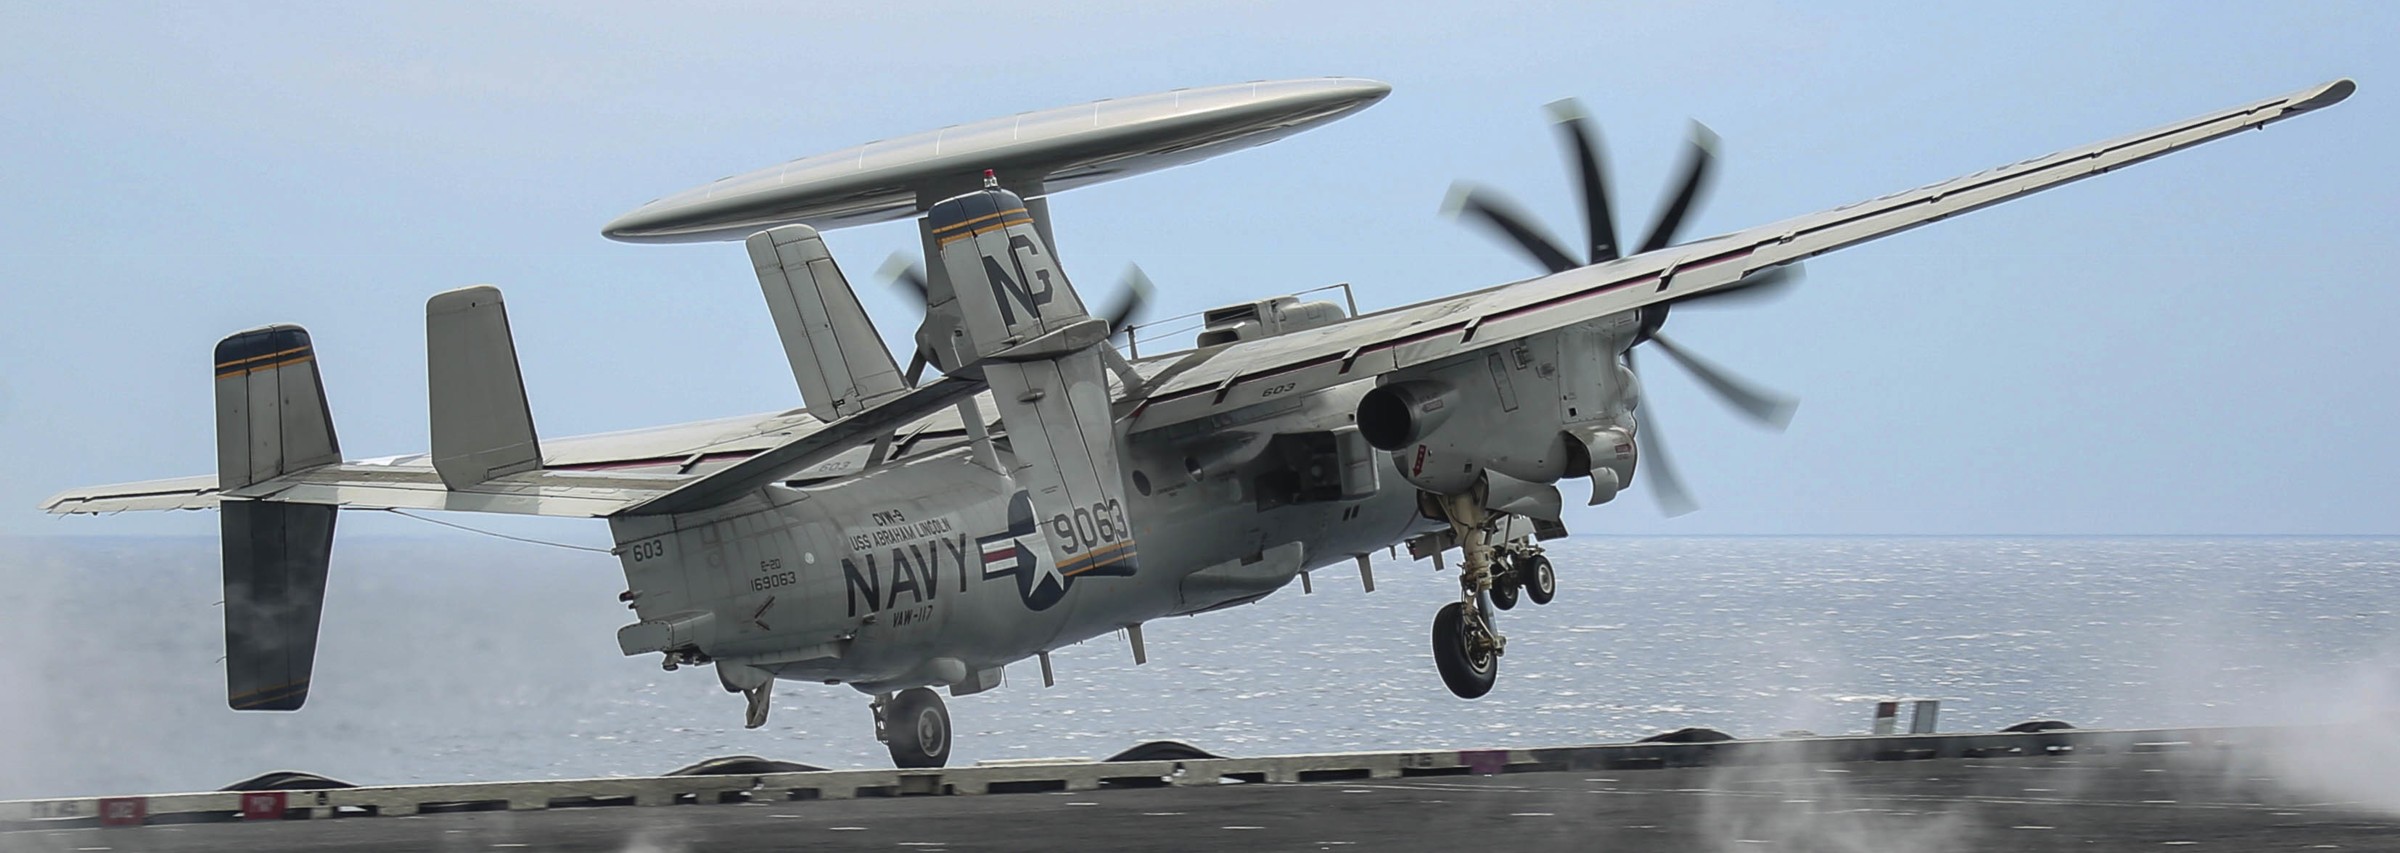 vaw-117 wallbangers airborne command and control squadron navy e-2d advanced hawkeye cvw-9 uss abraham lincoln cvn-72 10